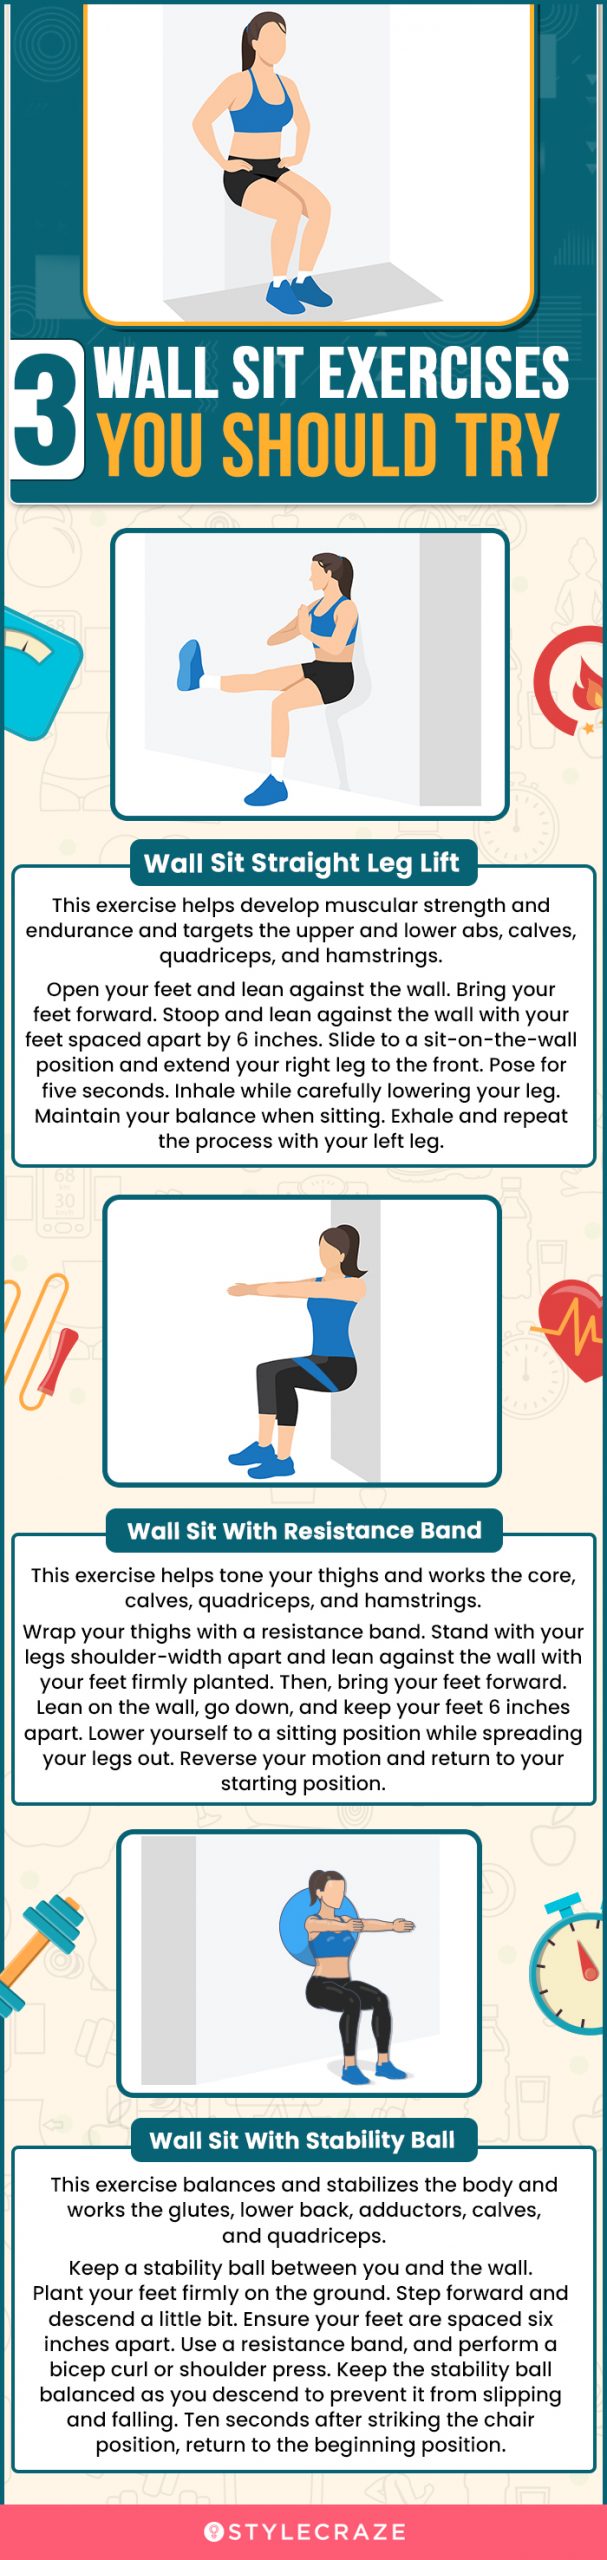 3 wall sit exercises you should try (infographic)